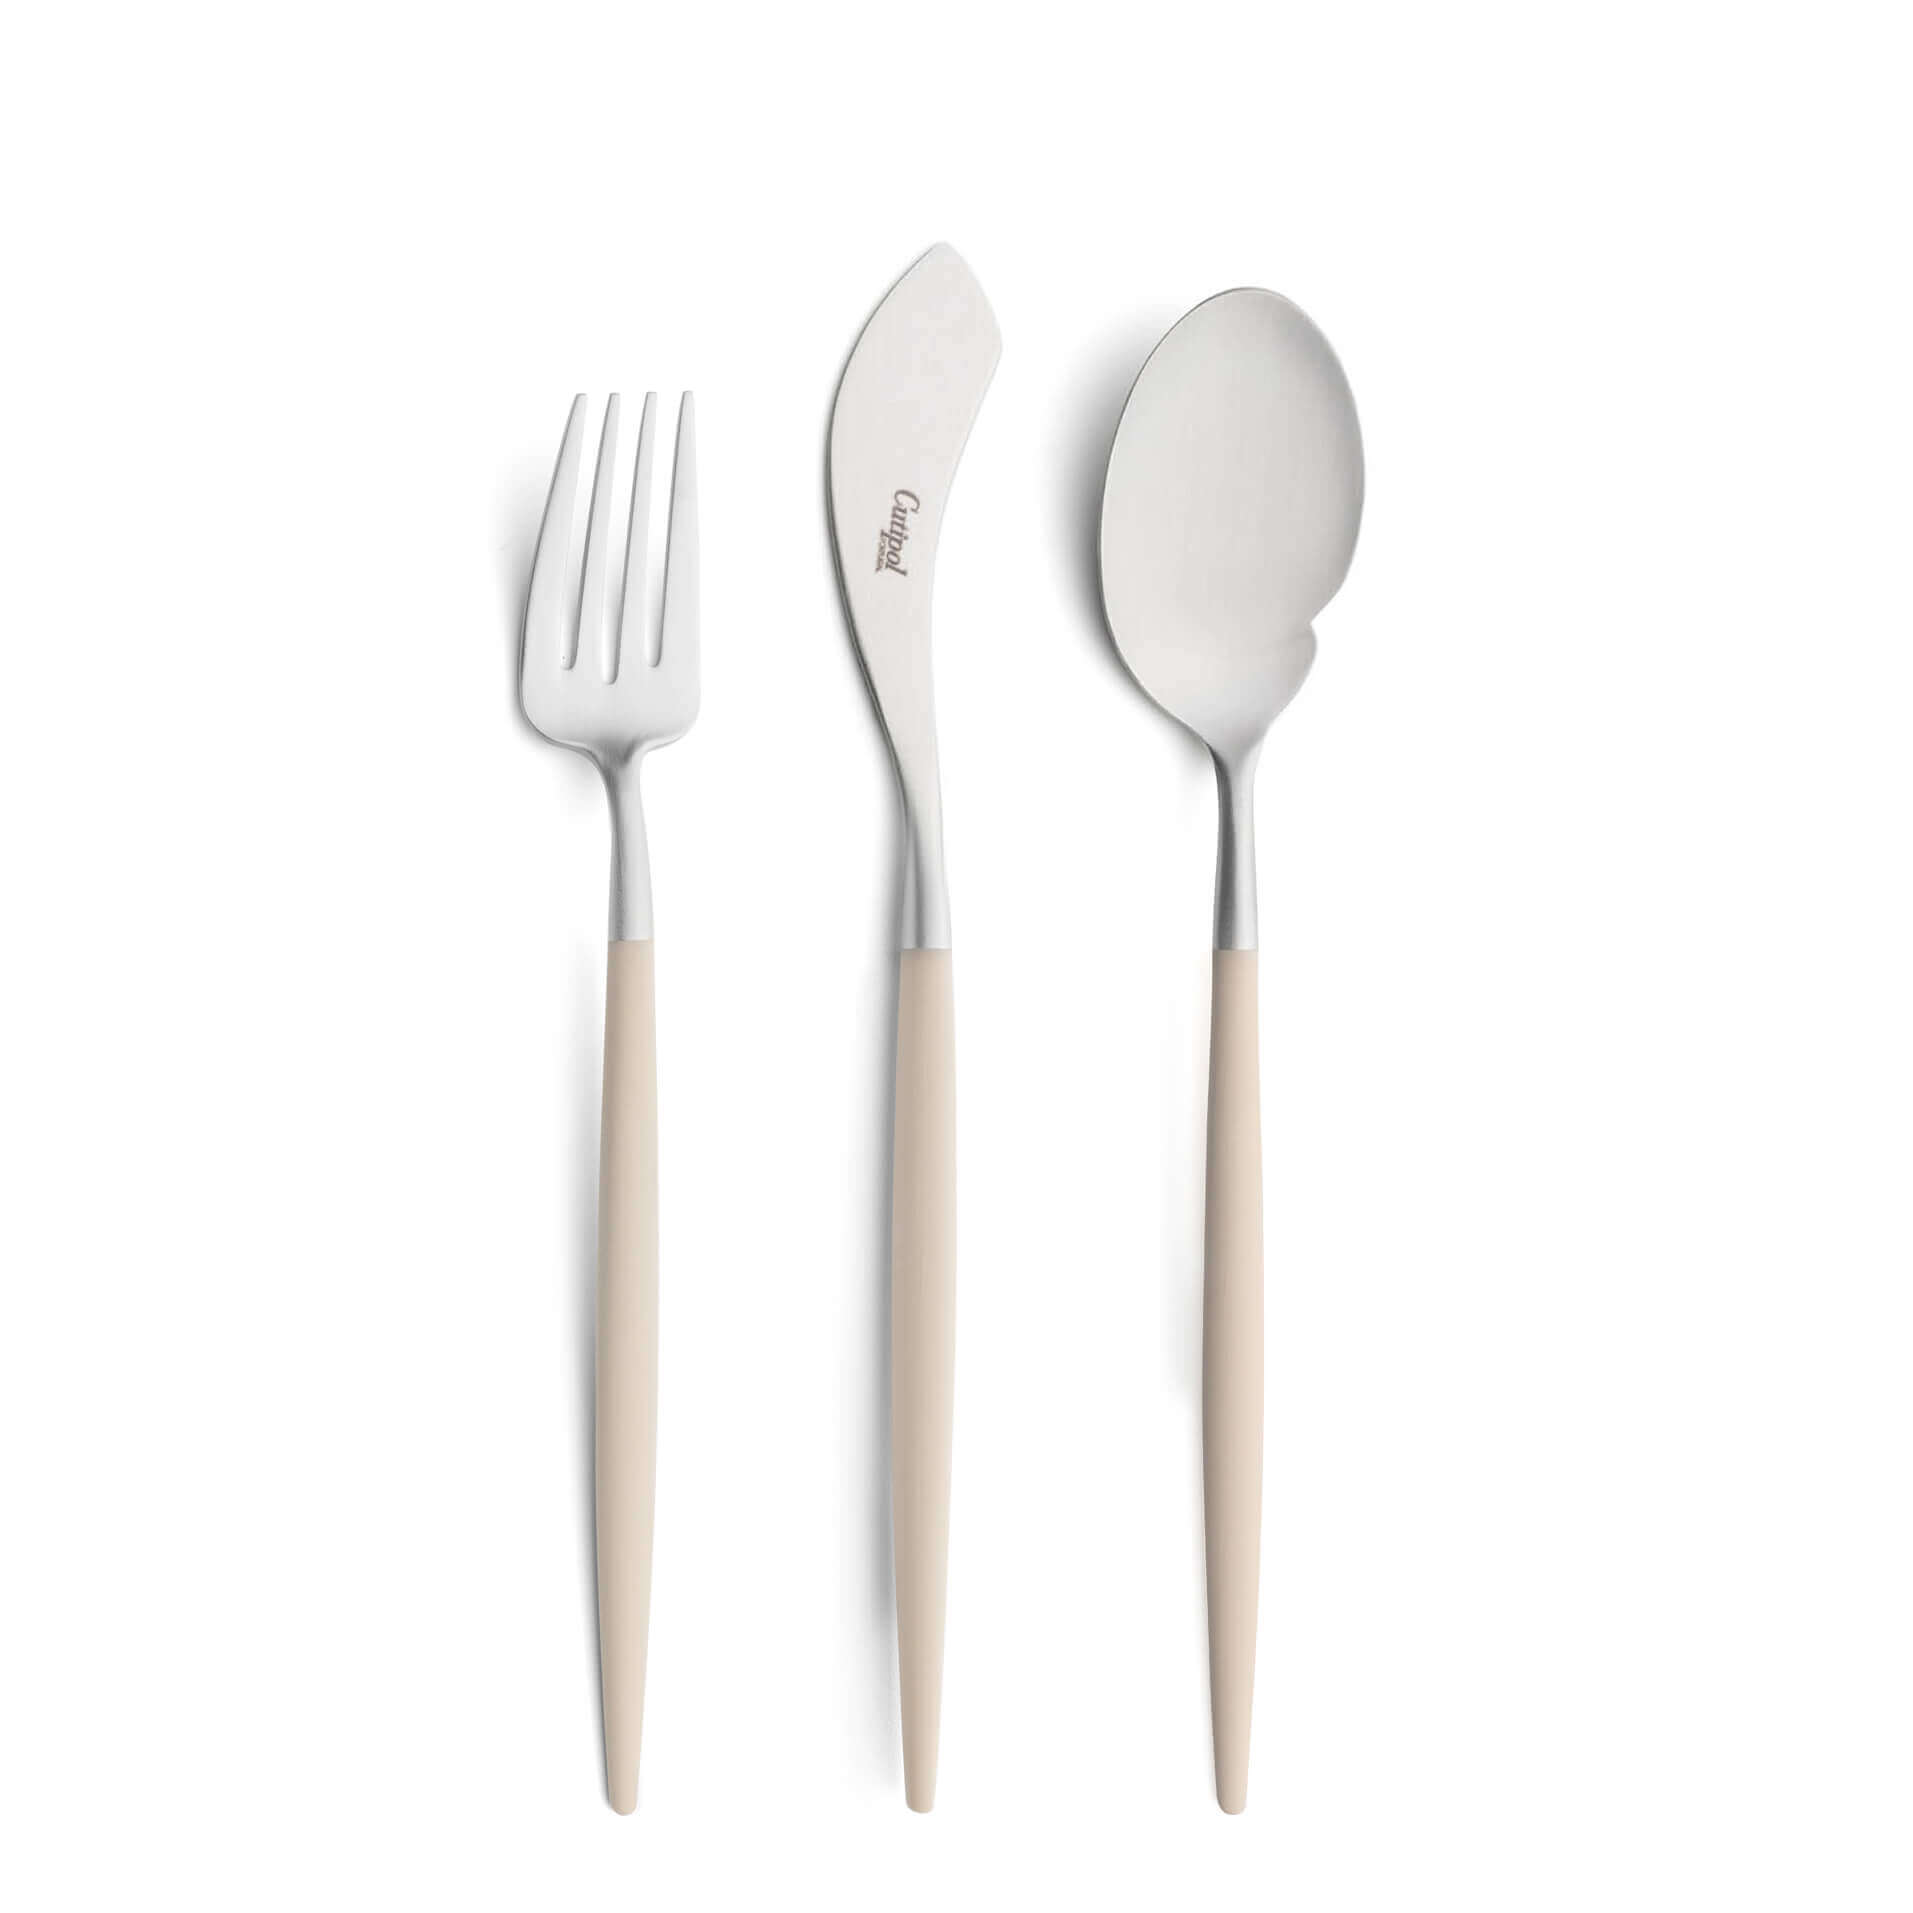 Cutipol Cutlery Goa Ivory with fish fork, fish knife and gourmet spoon